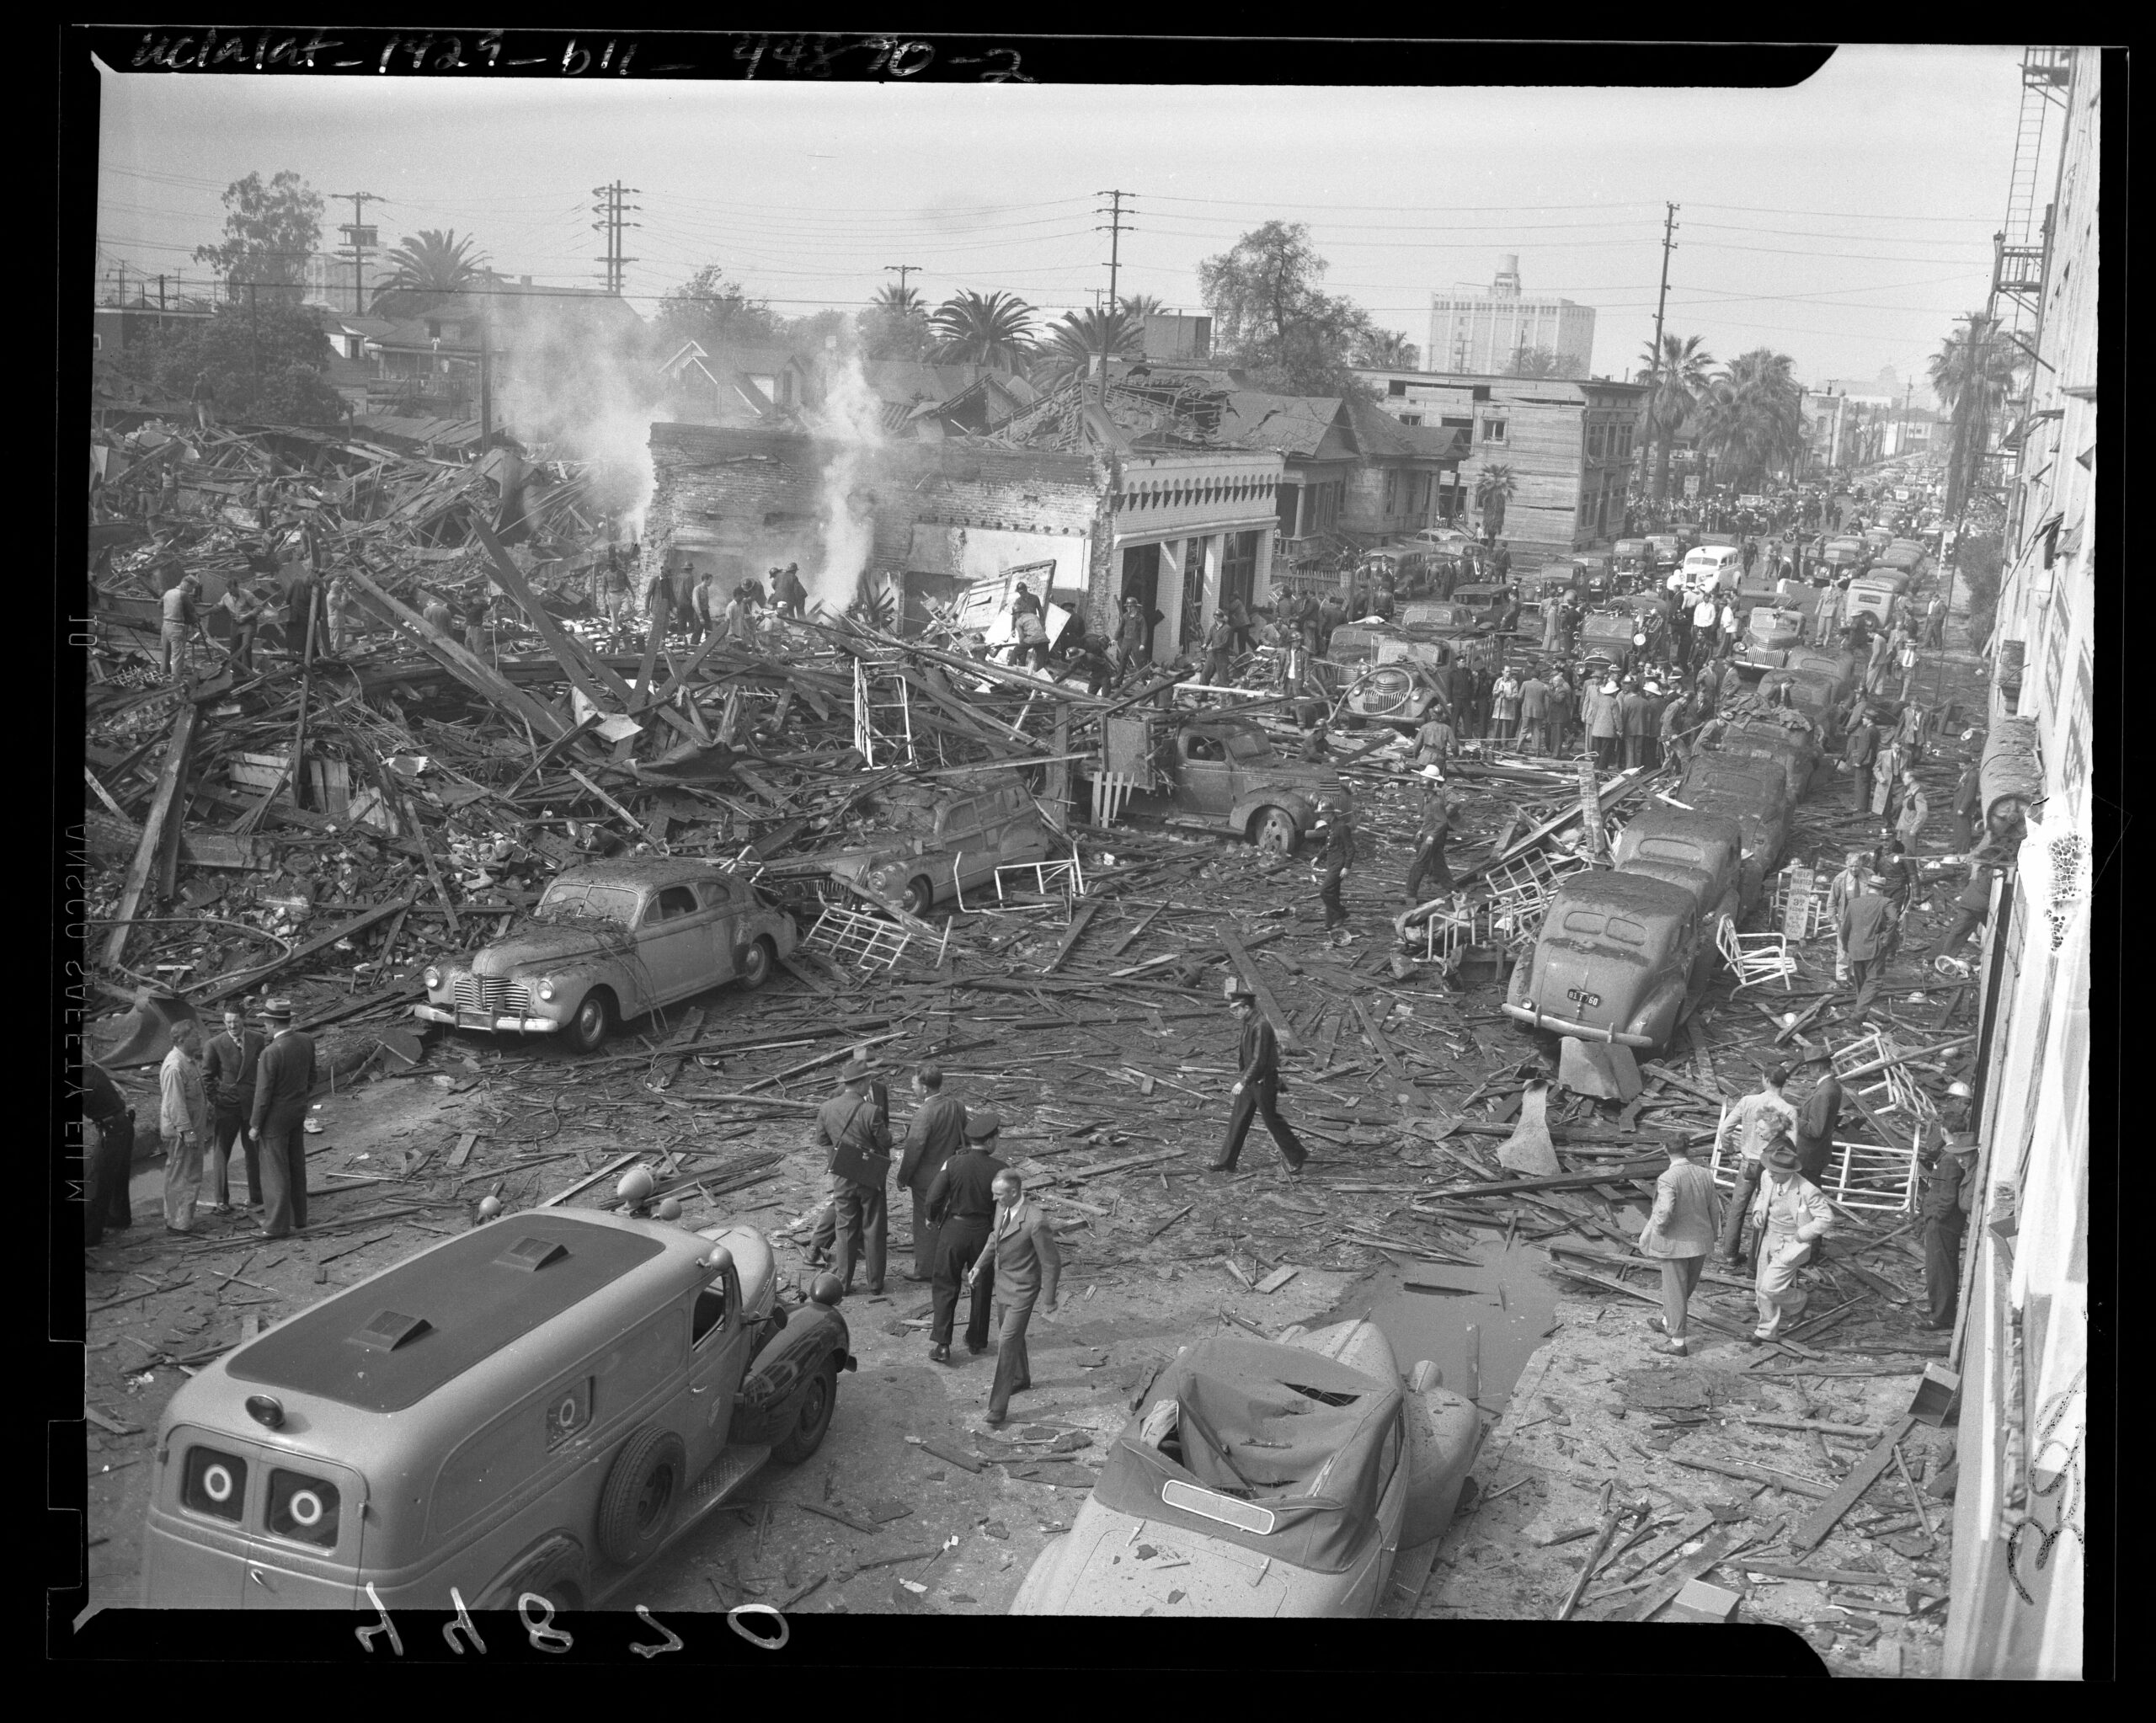 Emergency services on scene at O'Connor Electro-Plating explosion in Los Angeles, Calif., 1947. Courtesy of UCLA Library.